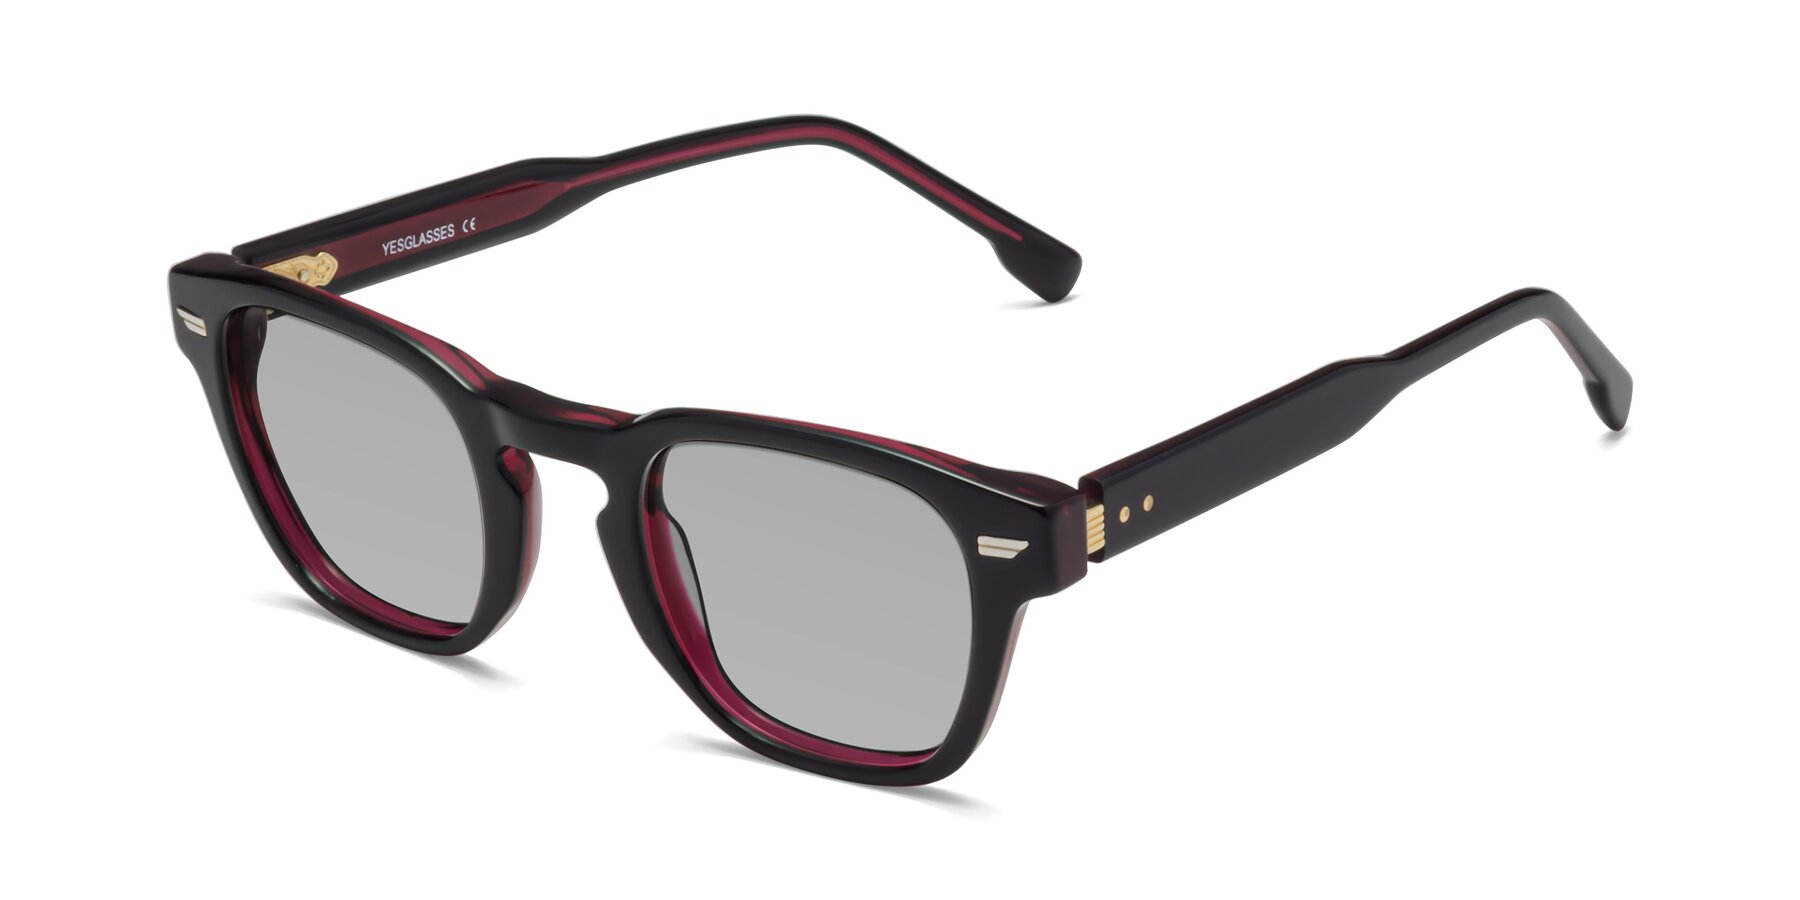 Angle of 1421 in Black-Wine with Light Gray Tinted Lenses